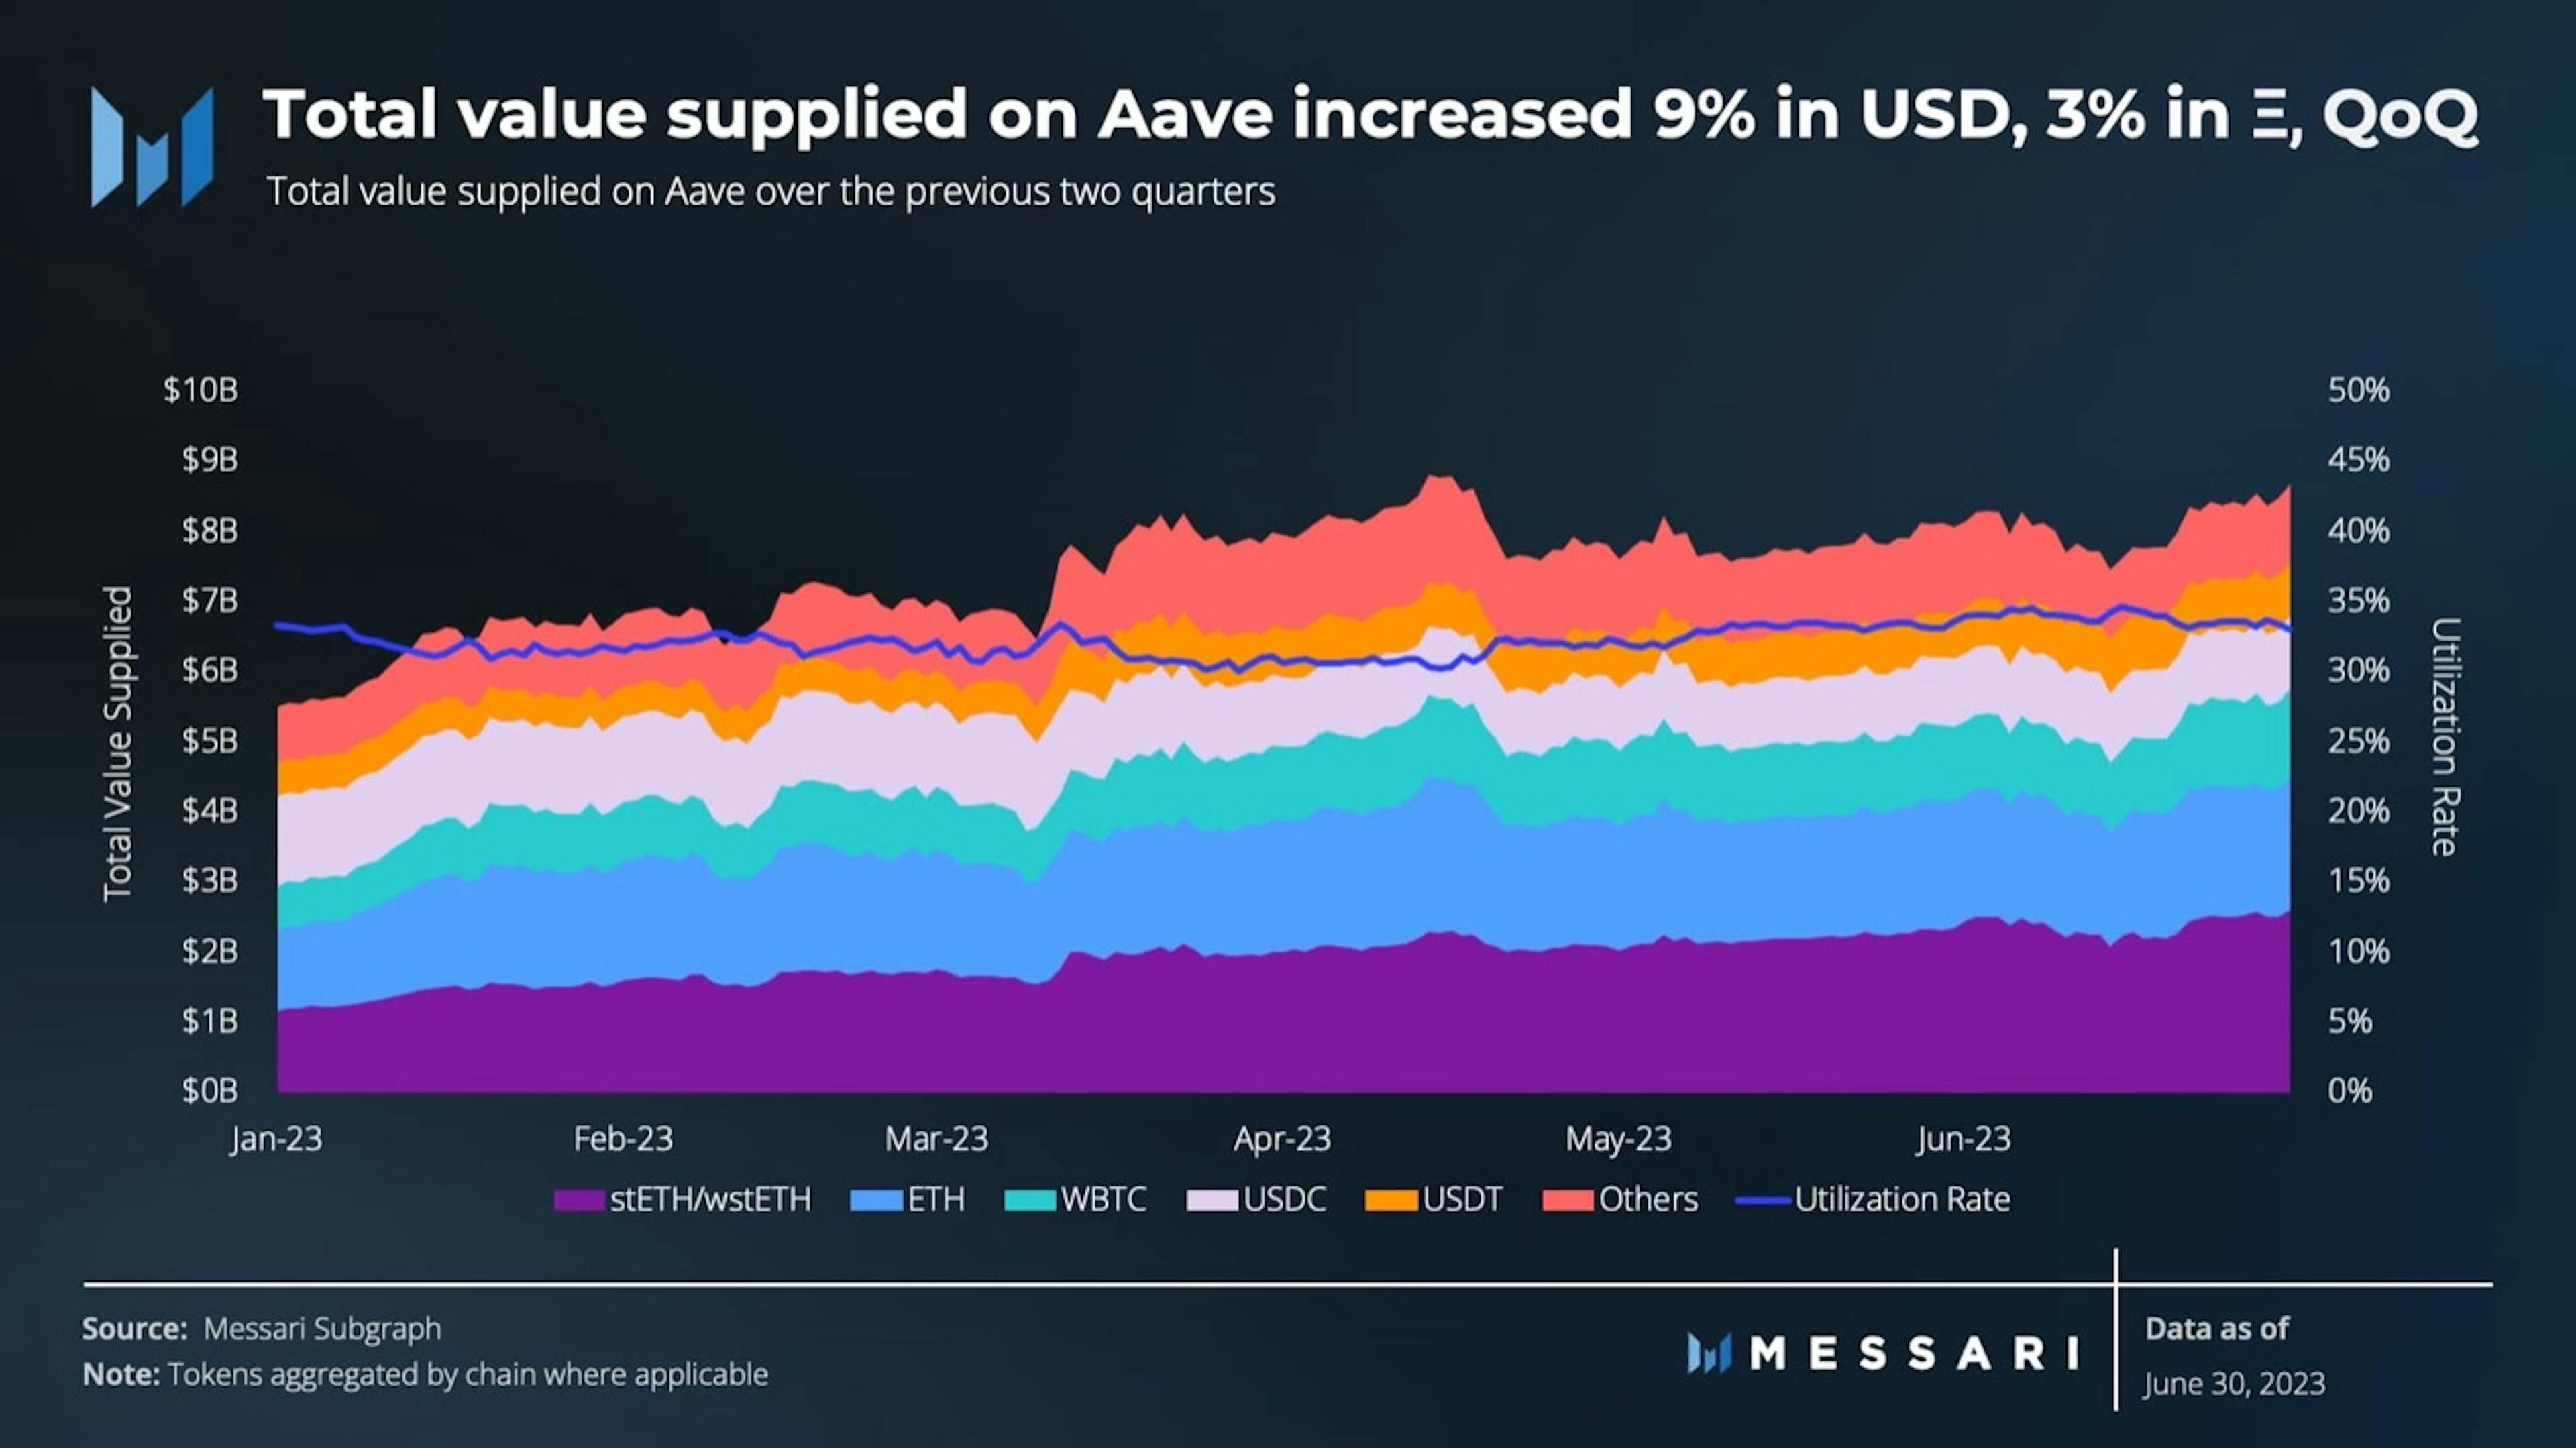 Total value on Aave maintains an upward trajectory